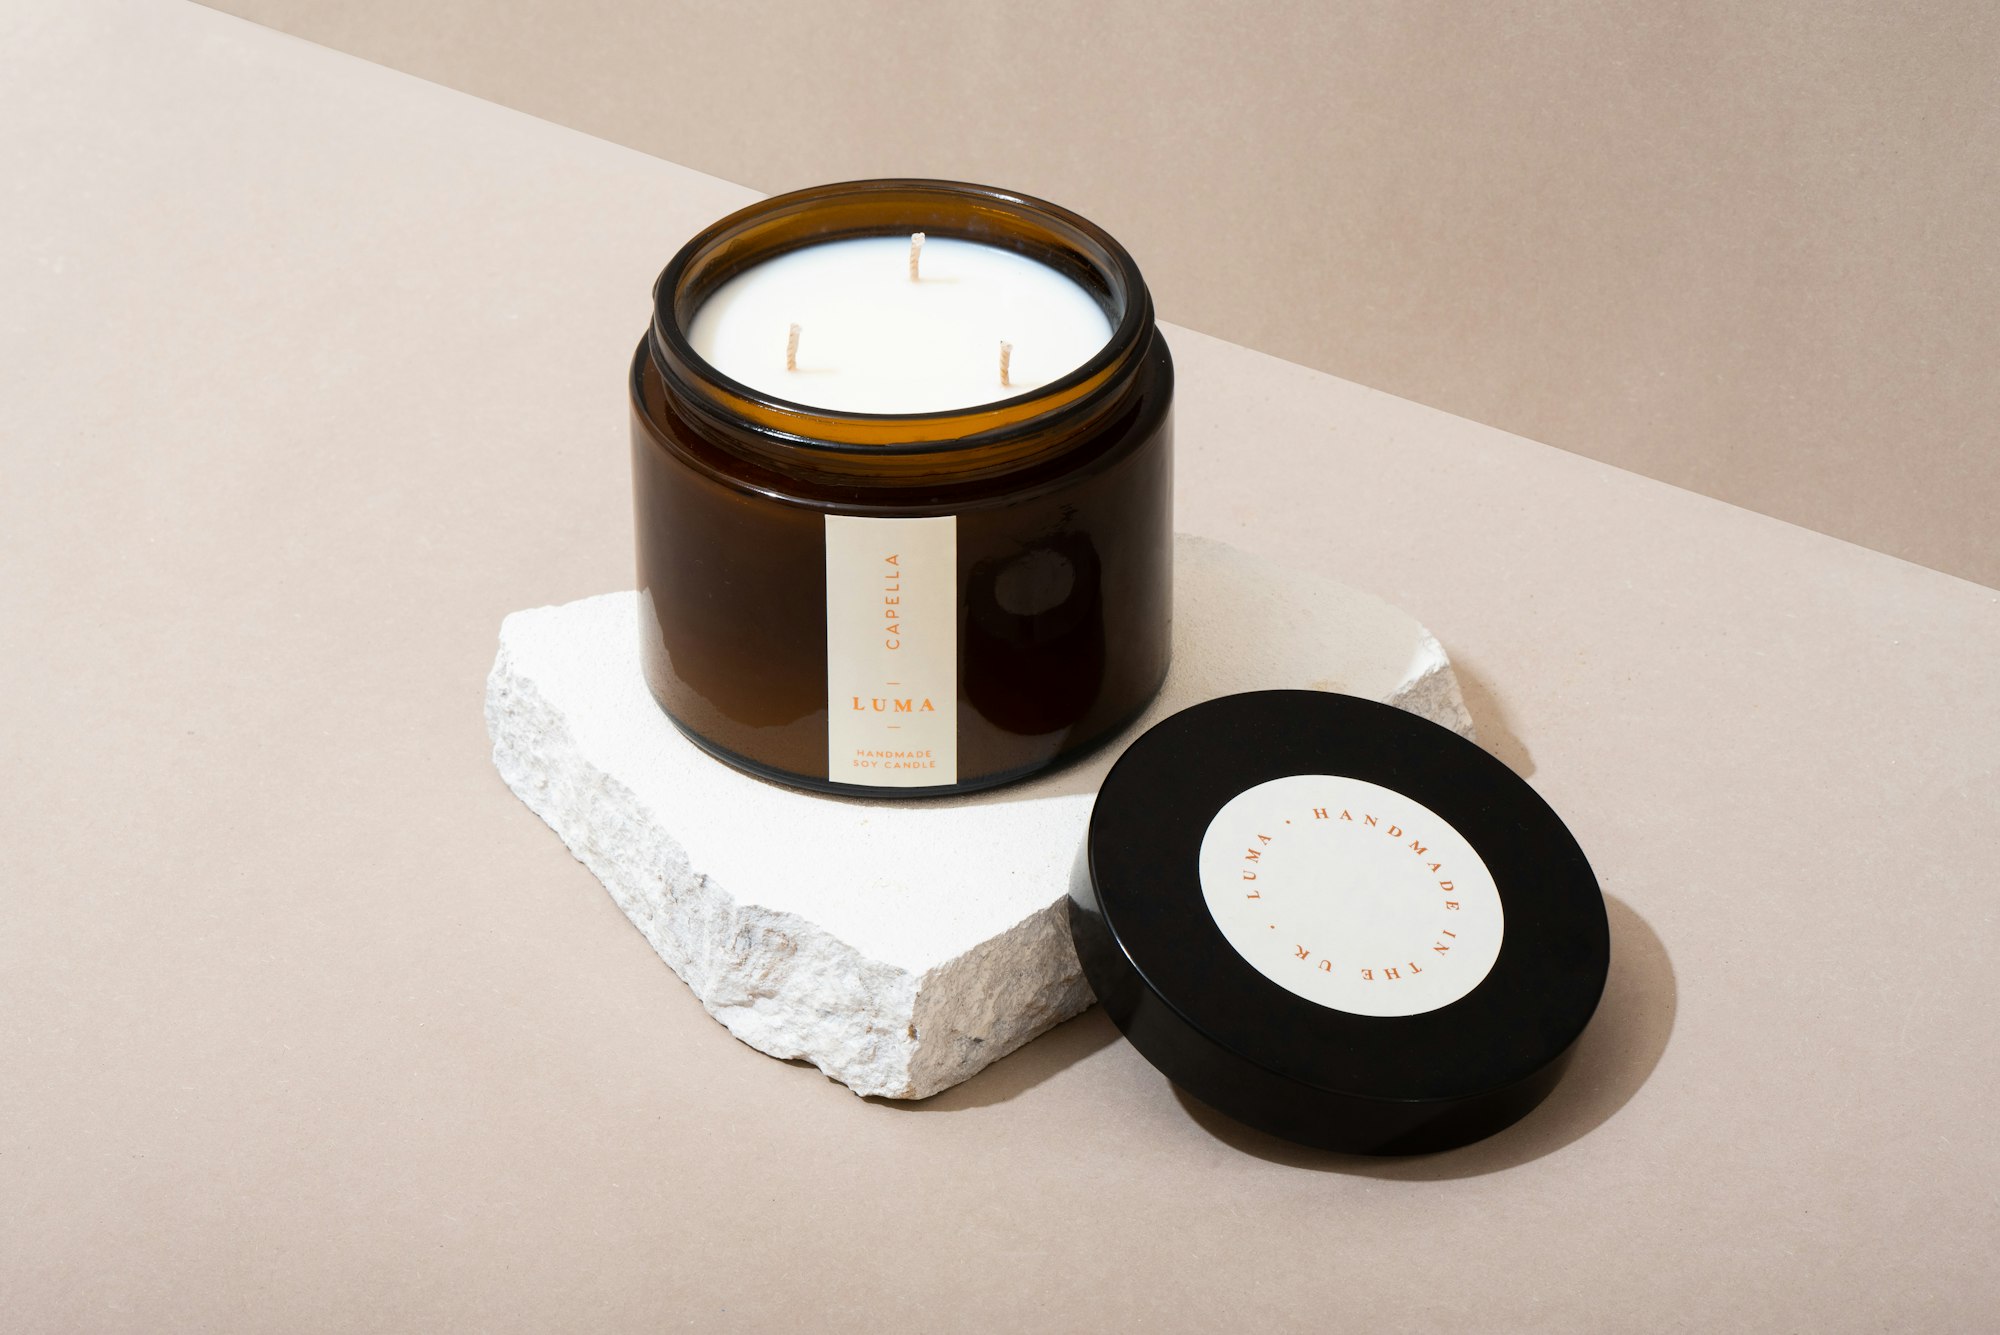 candlesbyluma.com

Organic hand-poured in the UK soy wax candles with over 15 beautiful scents. Photography taken by Perry Graham Photography.